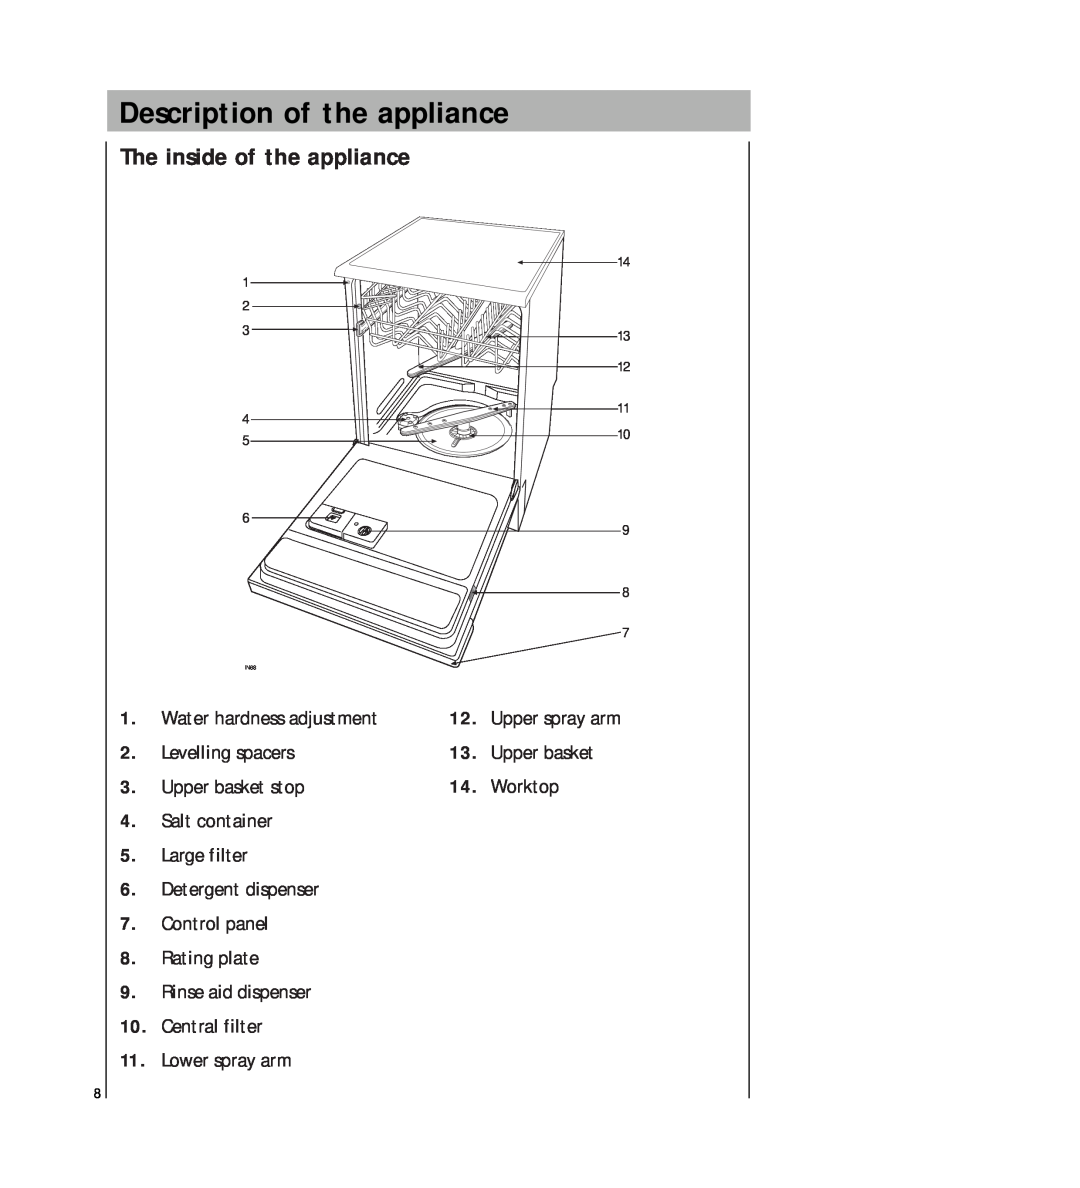 AEG 2807 manual Description of the appliance, The inside of the appliance, 14 13 12, IN68 